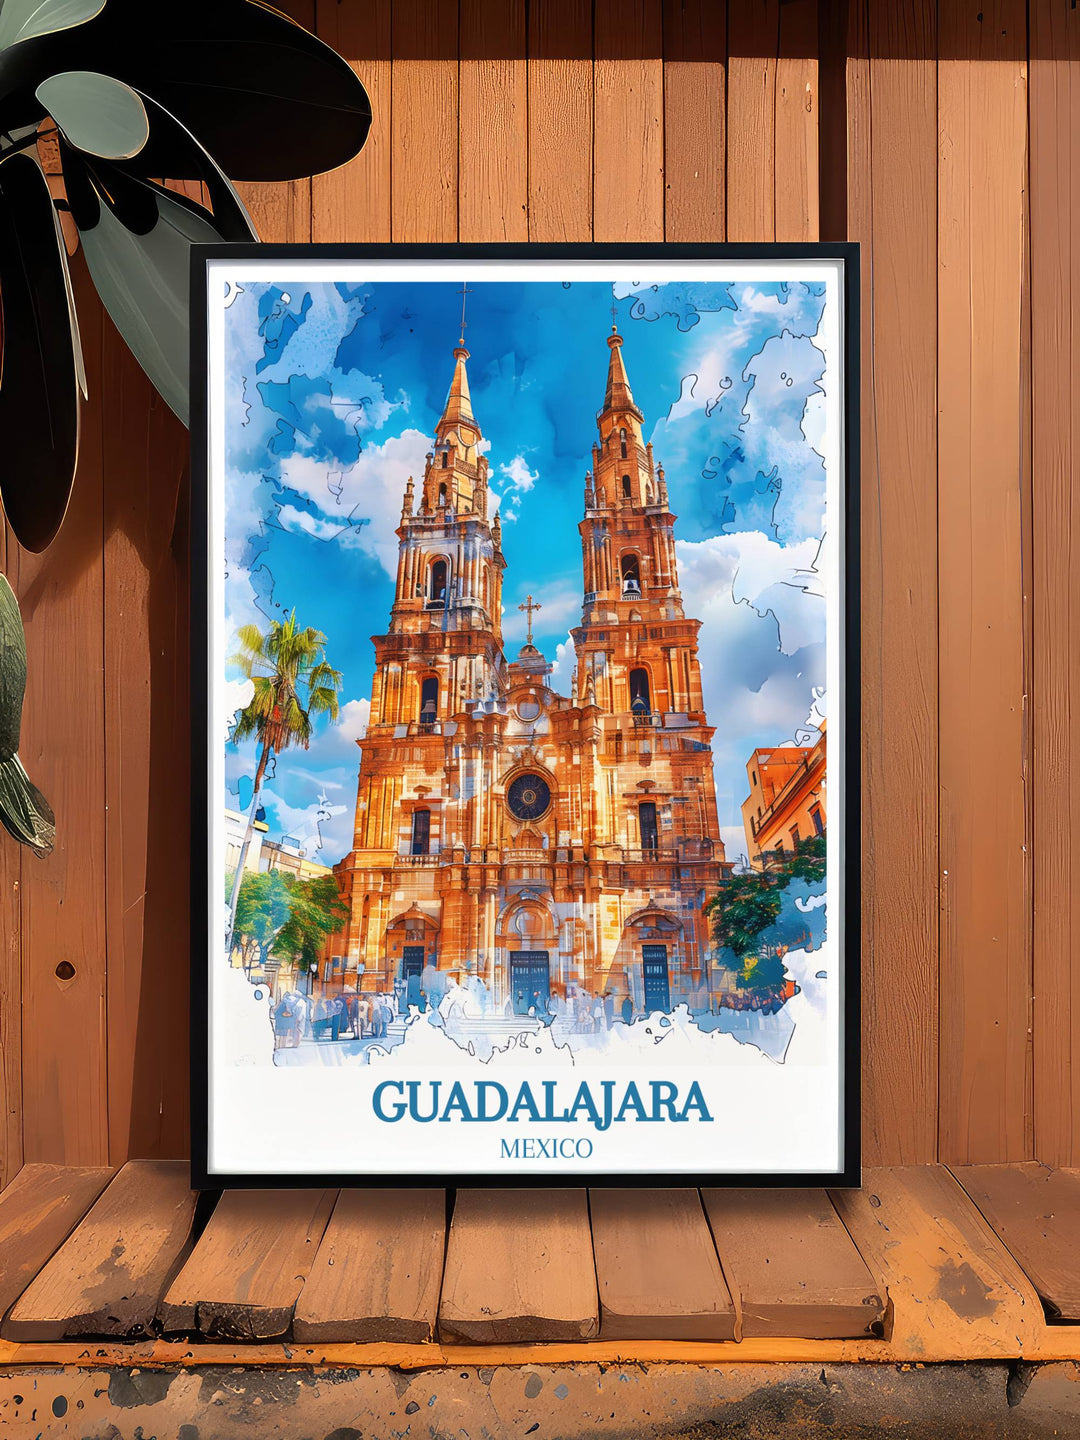 Tranquil scene of Lake Chapala surrounded by lush greenery, reflecting Guadalajaras serene natural beauty in a calming, picturesque art print